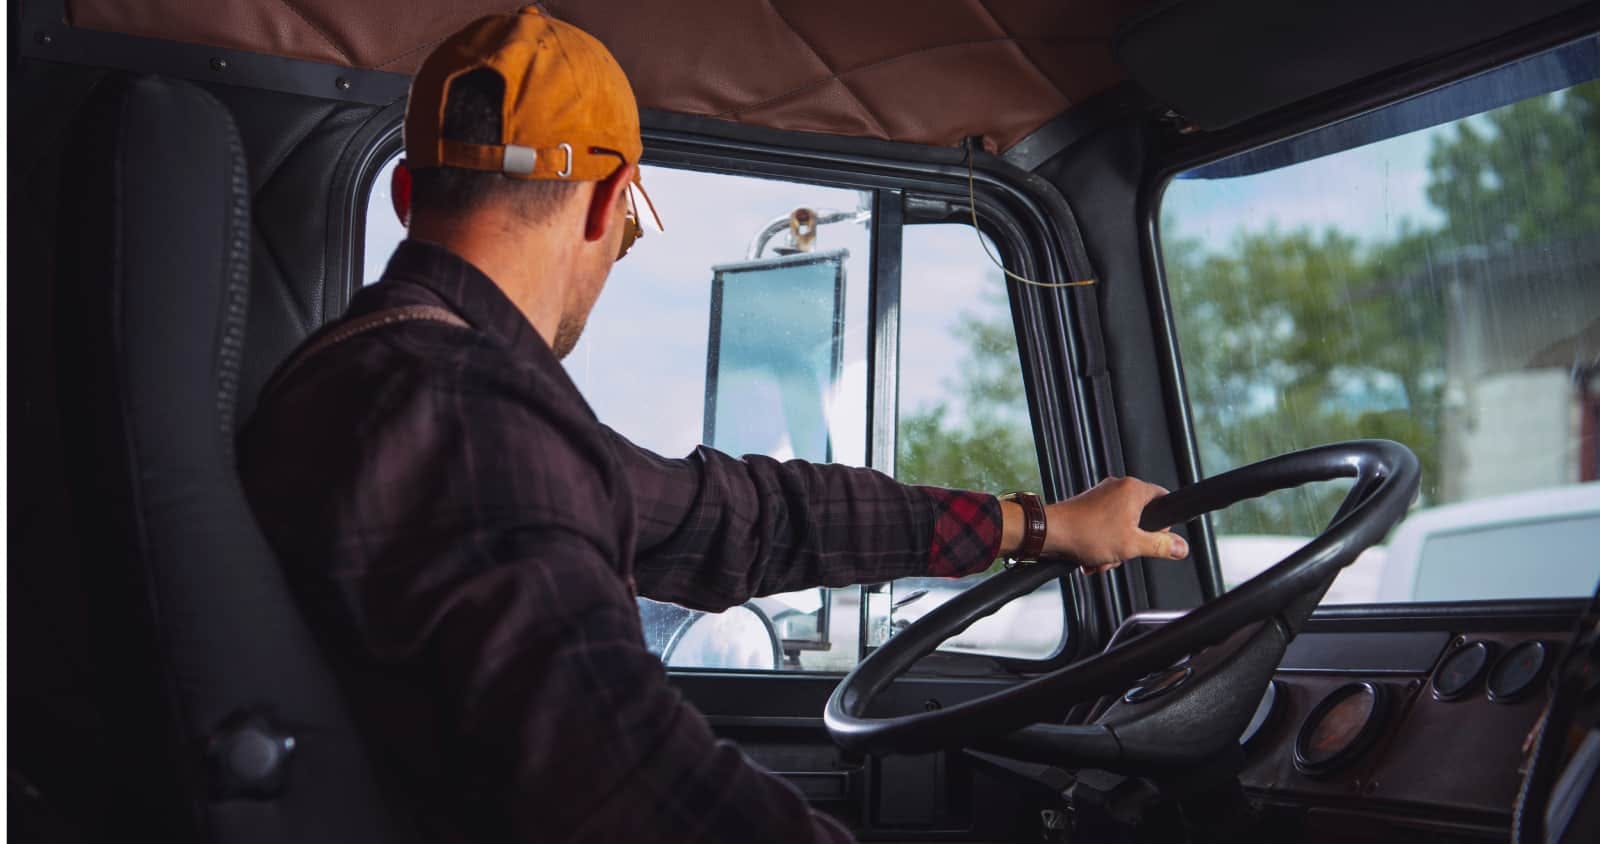 Things to Take into Consideration While Choosing a Truck Driving Job